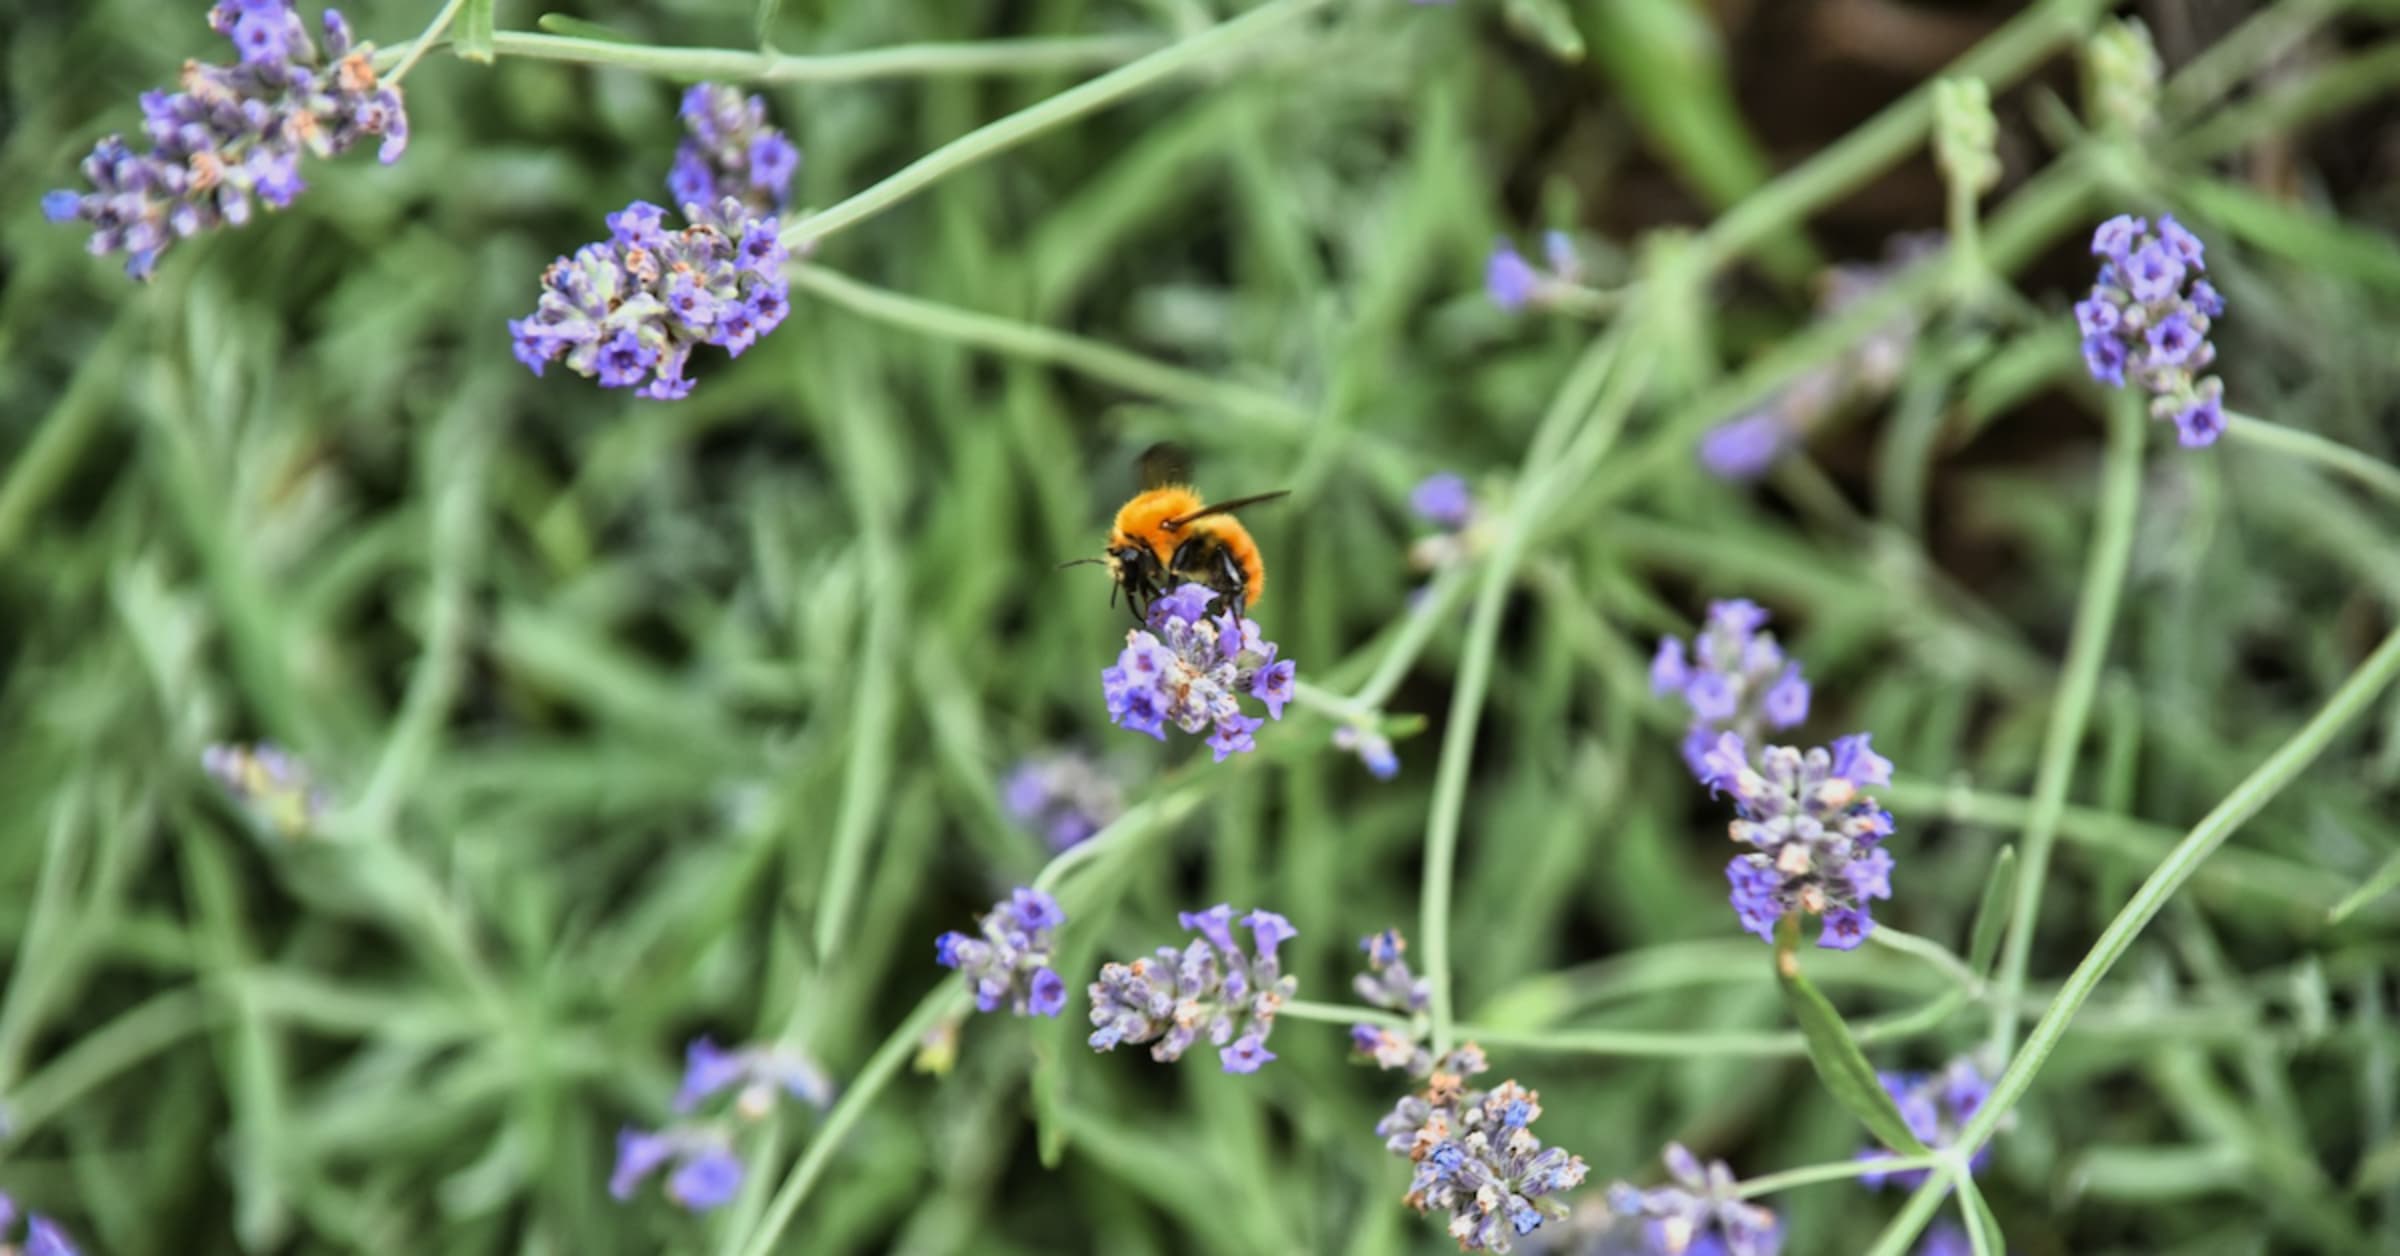 Beyond Honey Bees: How Wild Bees Contribute to Your Outdoor Experiences